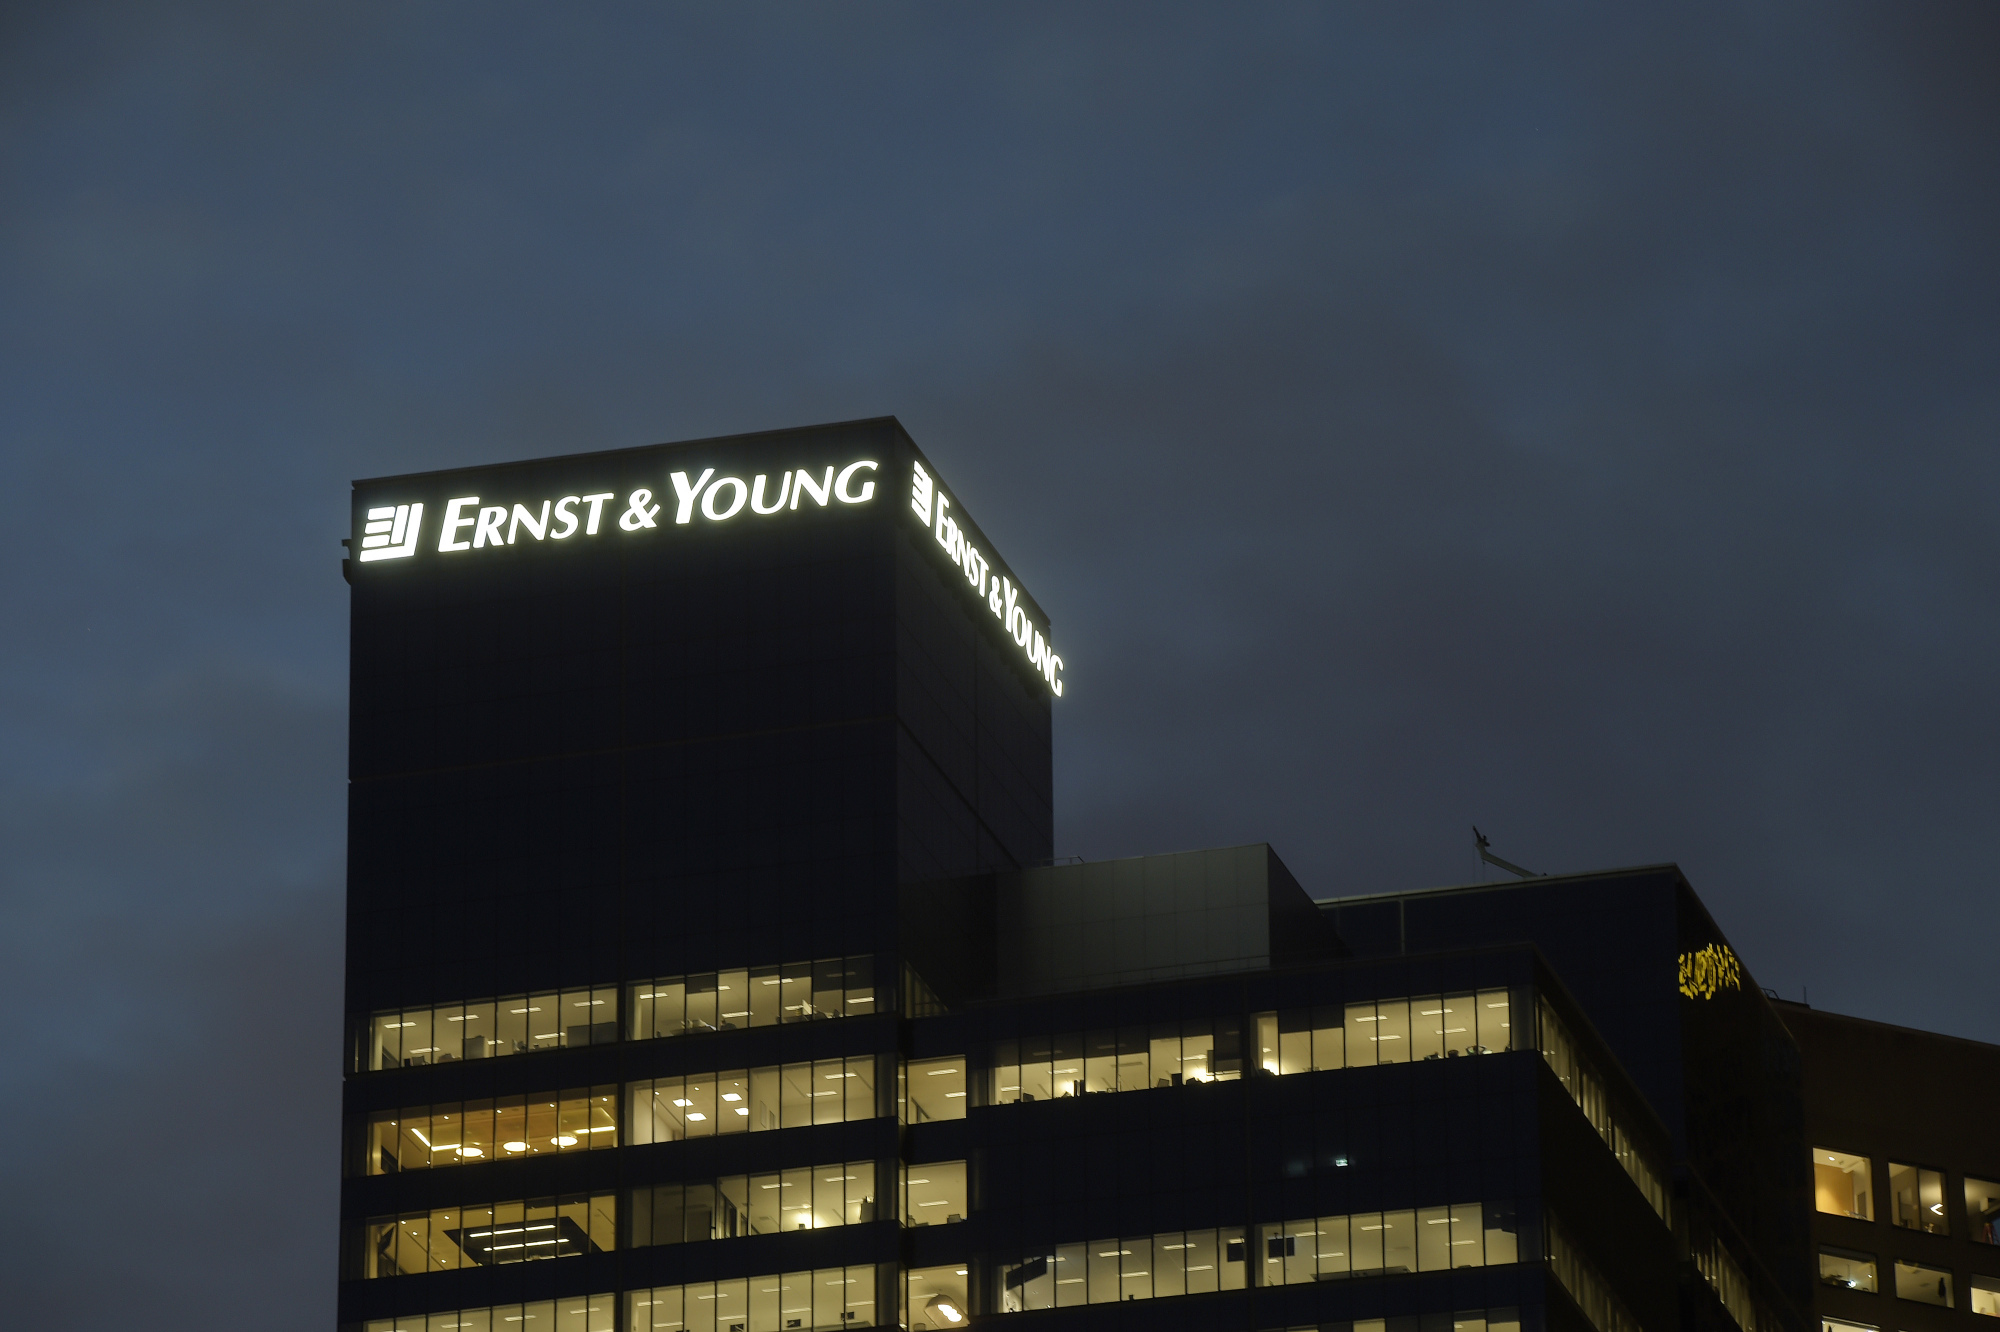 Signage for Ernst &amp; Young LLP is illuminated atop the company's building in Melbourne, Australia.